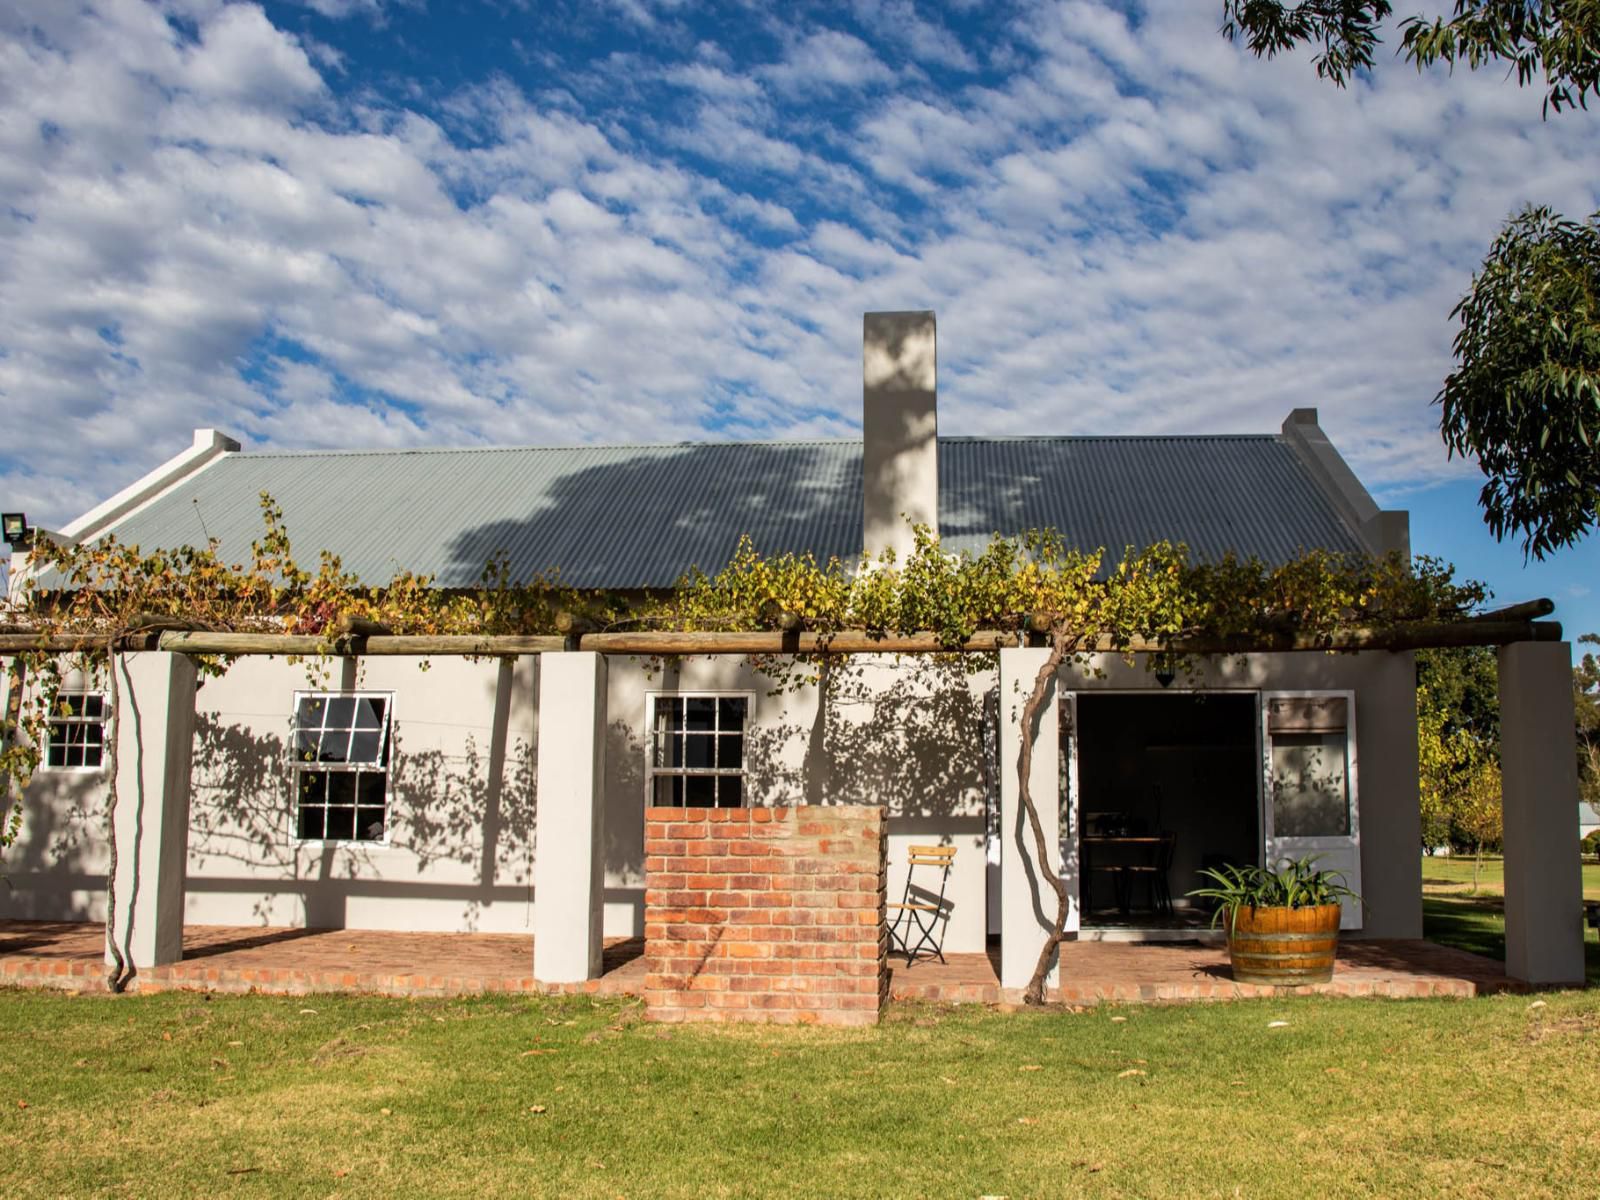 Saronsberg Vineyard Cottages Tulbagh Western Cape South Africa House, Building, Architecture